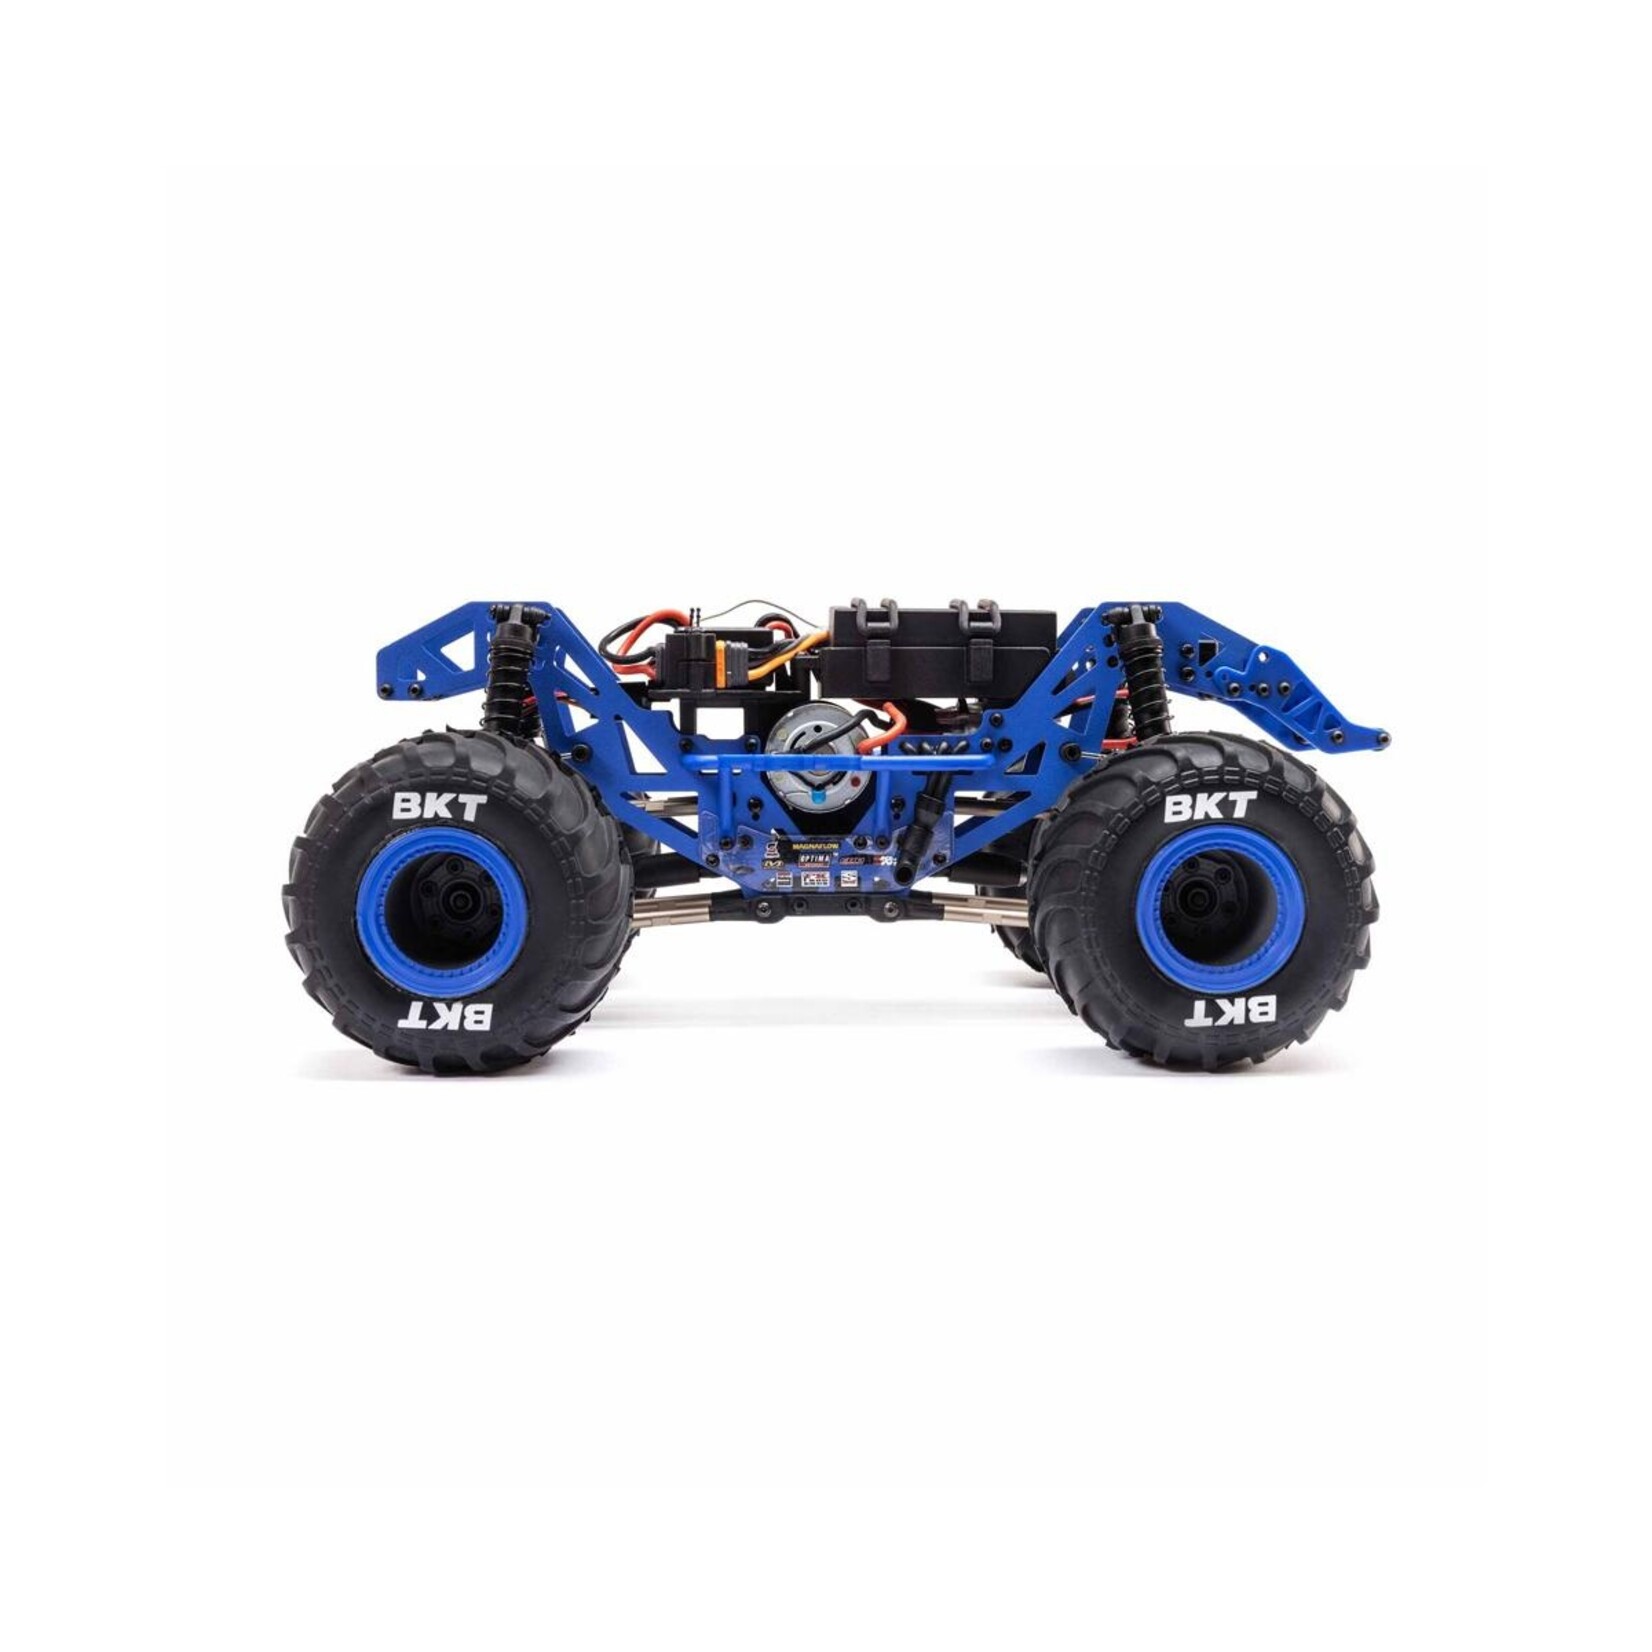 Losi Losi 1/18 Mini LMT 4X4 Brushed RTR Monster Truck (Son-Uva Digger) w/SLT2 2.4GHz Radio, Battery & Charger #LOS01026T2